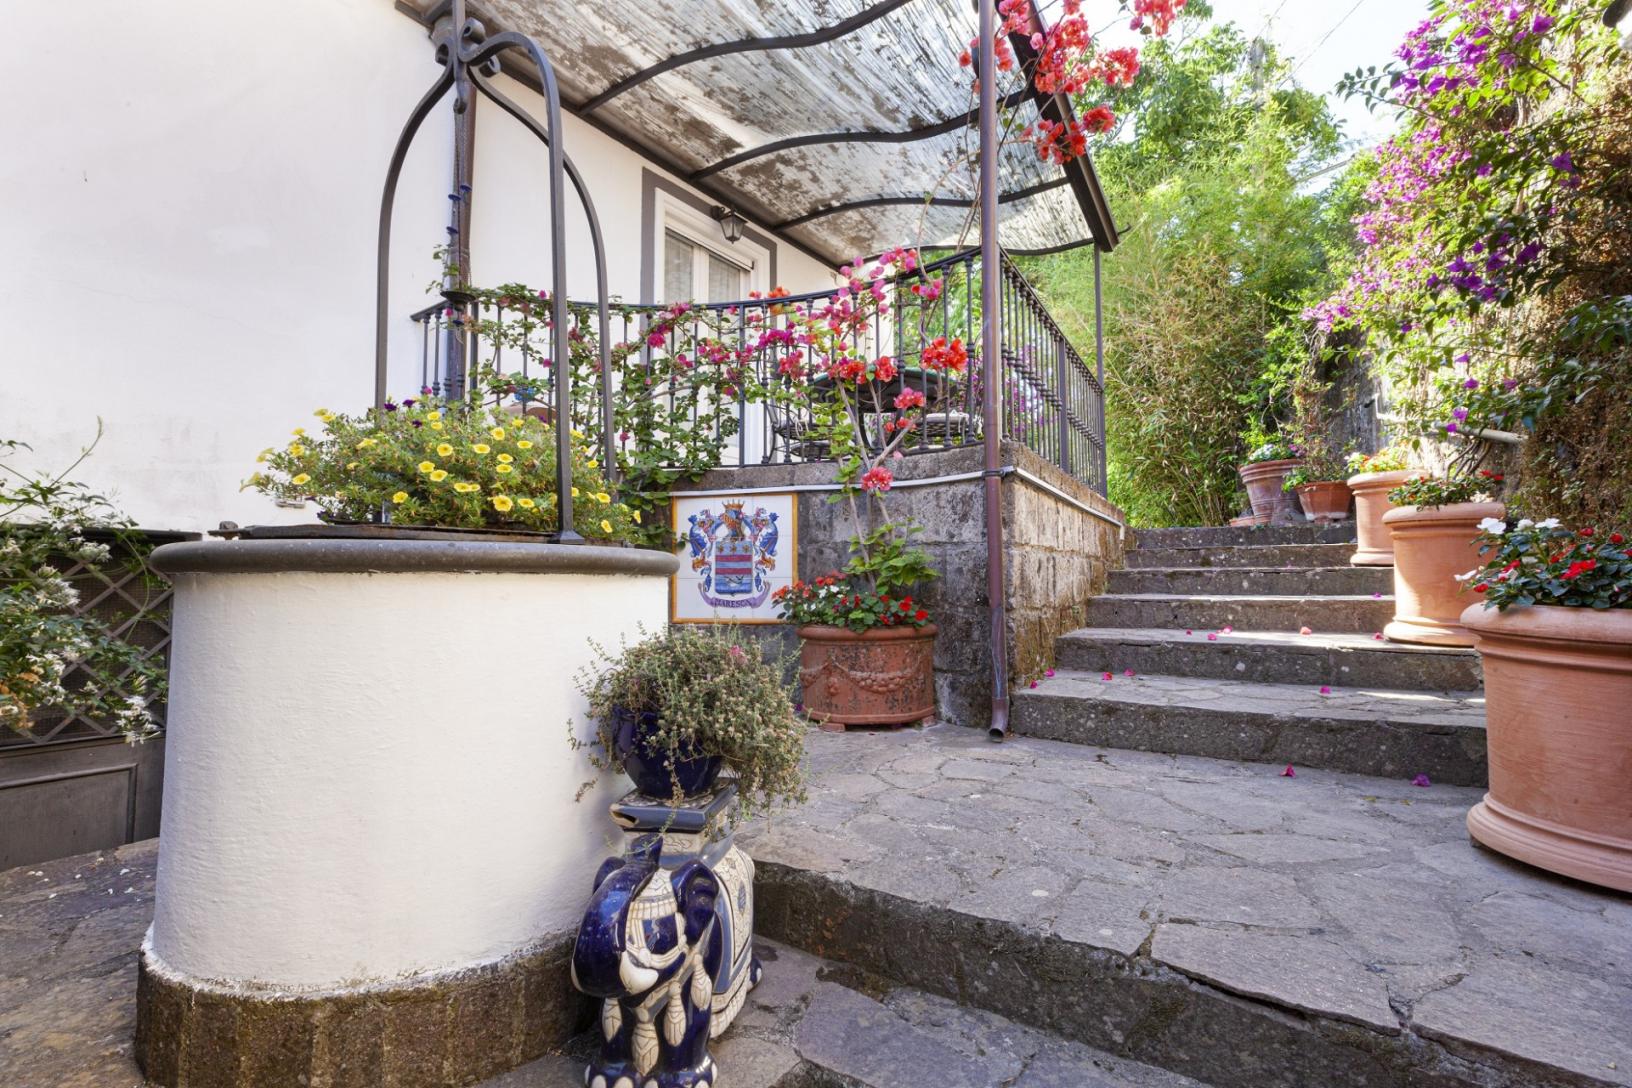 Visit our typical Sorrento garden with lemon grove-50